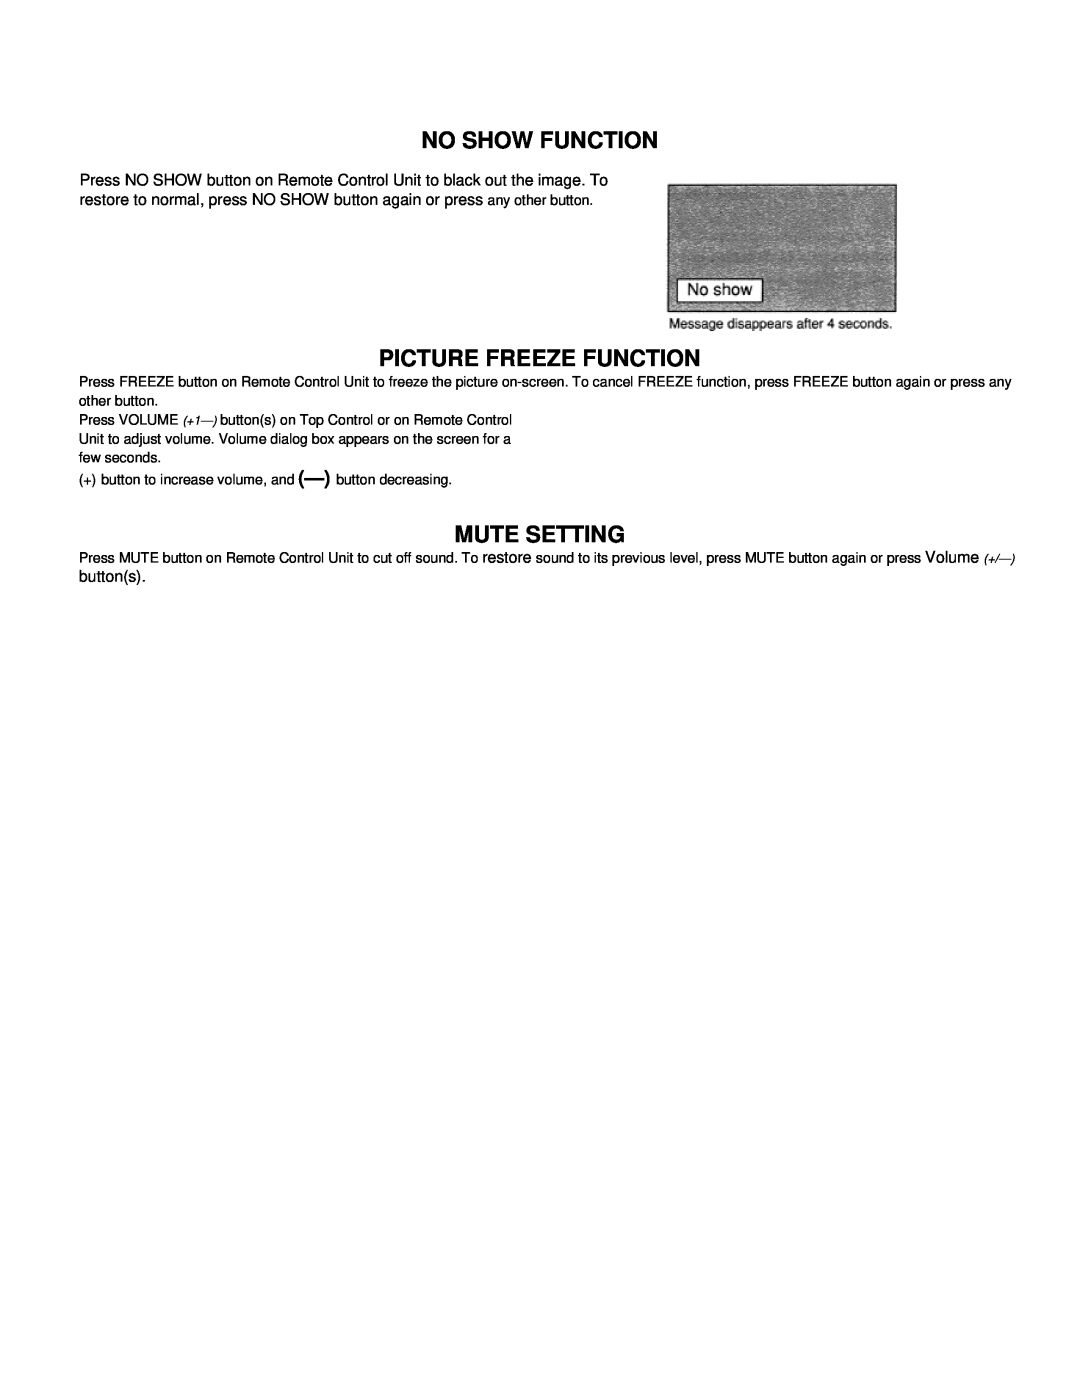 Eiki LC-VC1 owner manual No Show Function, Picture Freeze Function, Mute Setting 